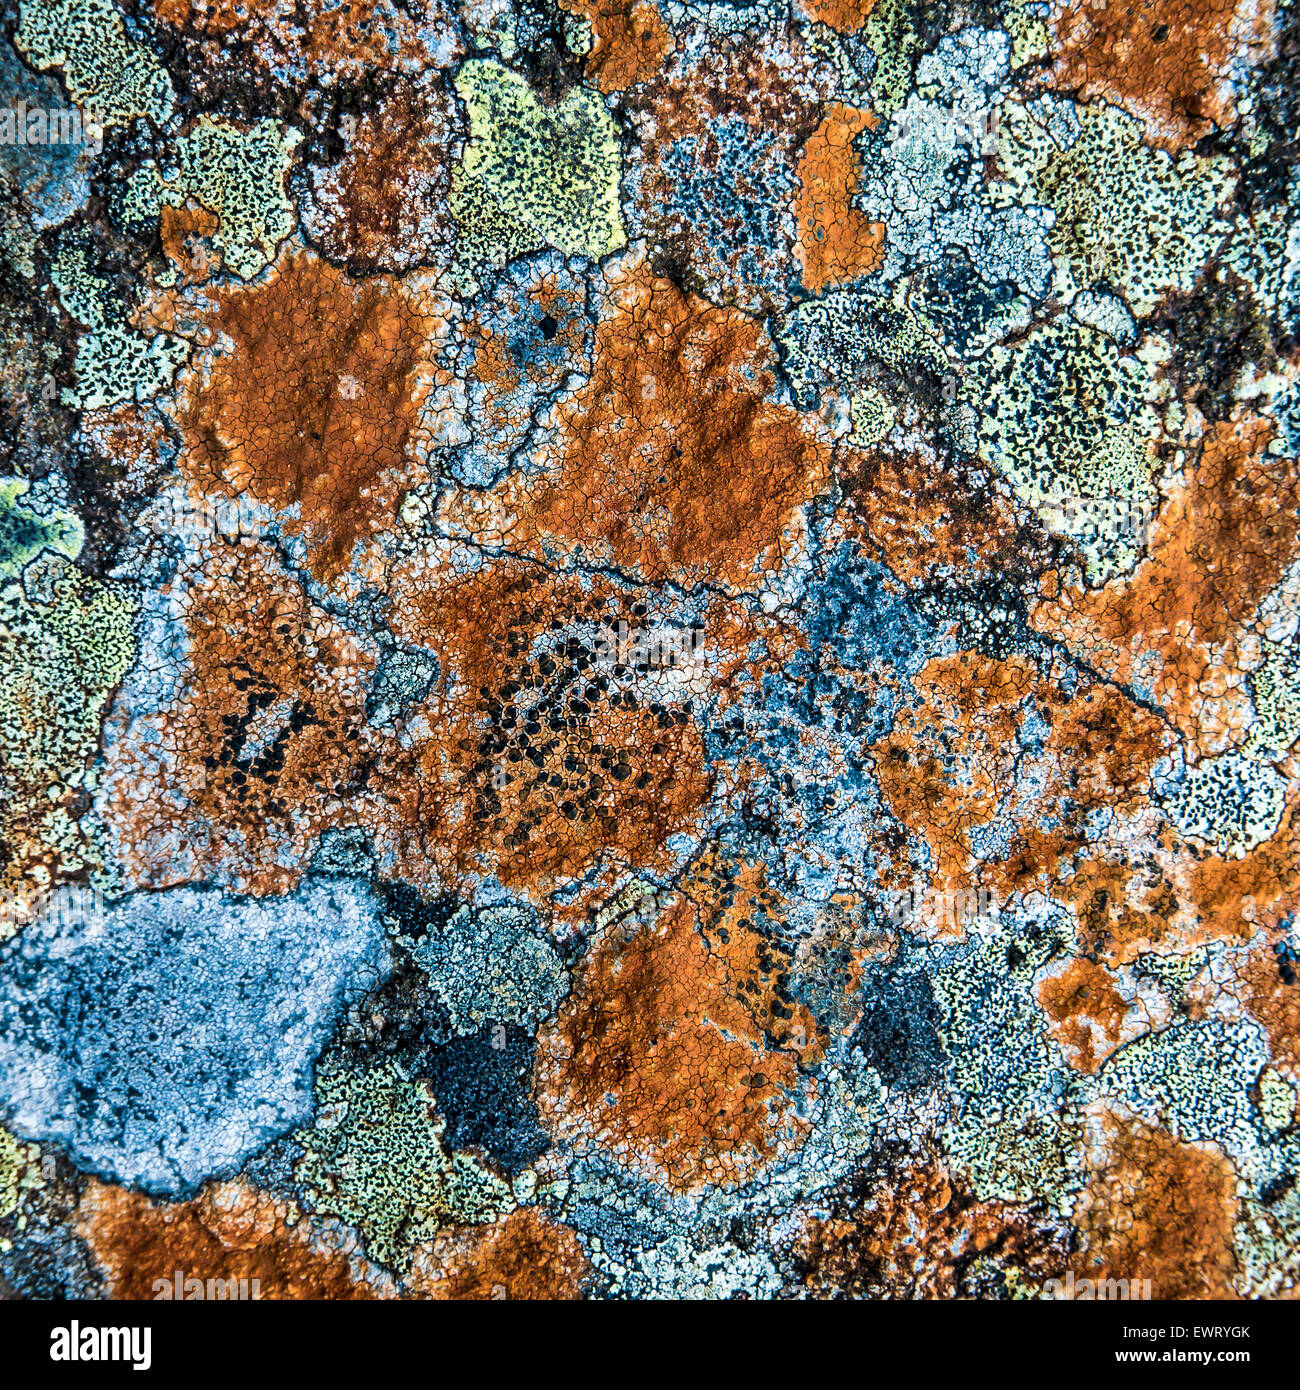 Abstract Background Texture Of Multi-Colored Lichen On A Rock Stock Photo